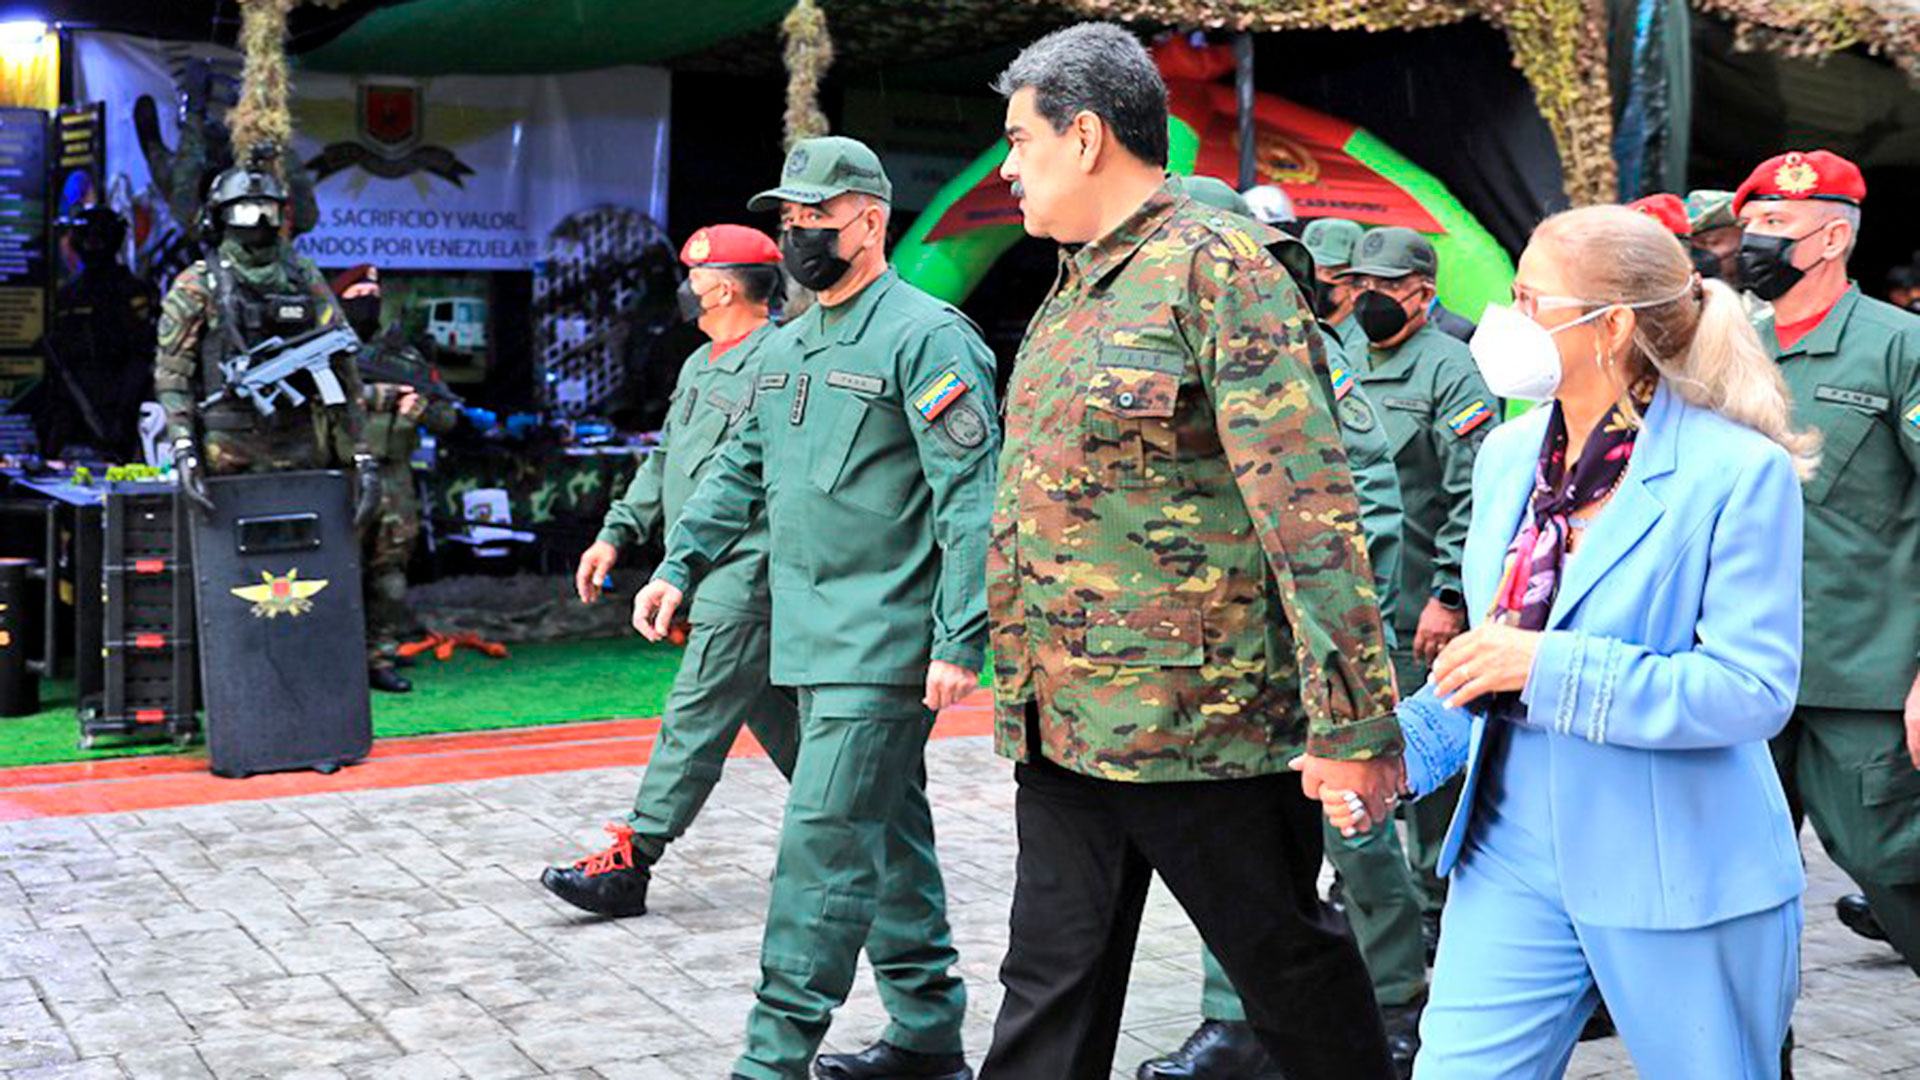 Arrival of dictator Nicolás Maduro to the reception of the Bolivarian Armed Forces (Venezuela Presidency)